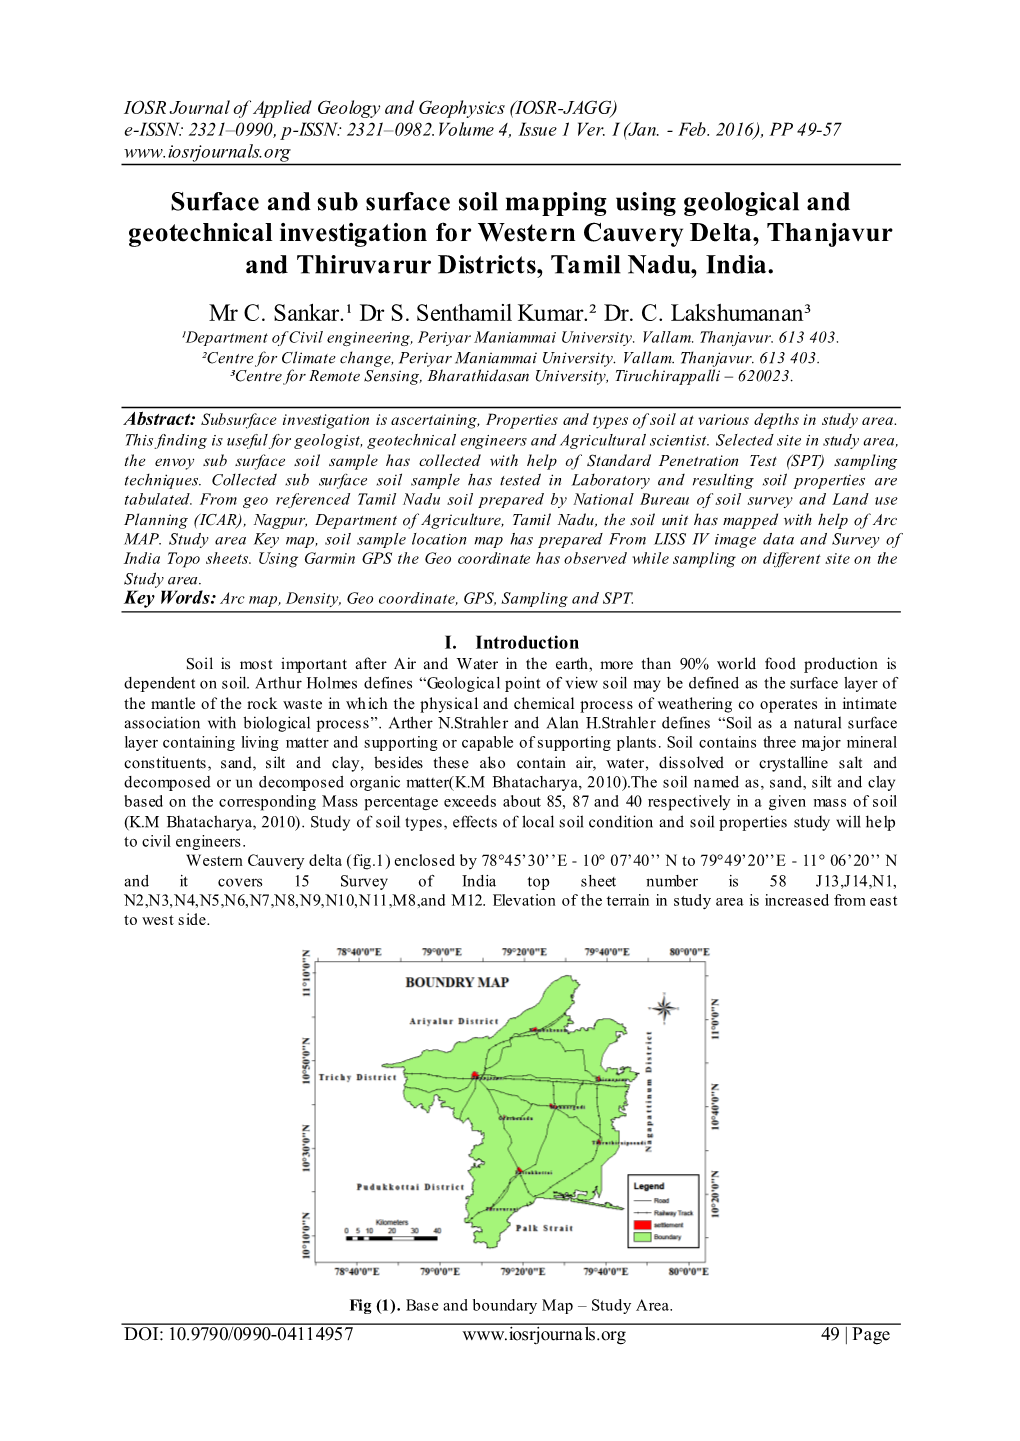 Surface and Sub Surface Soil Mapping Using Geological and Geotechnical Investigation for Western Cauvery Delta, Thanjavur and Thiruvarur Districts, Tamil Nadu, India